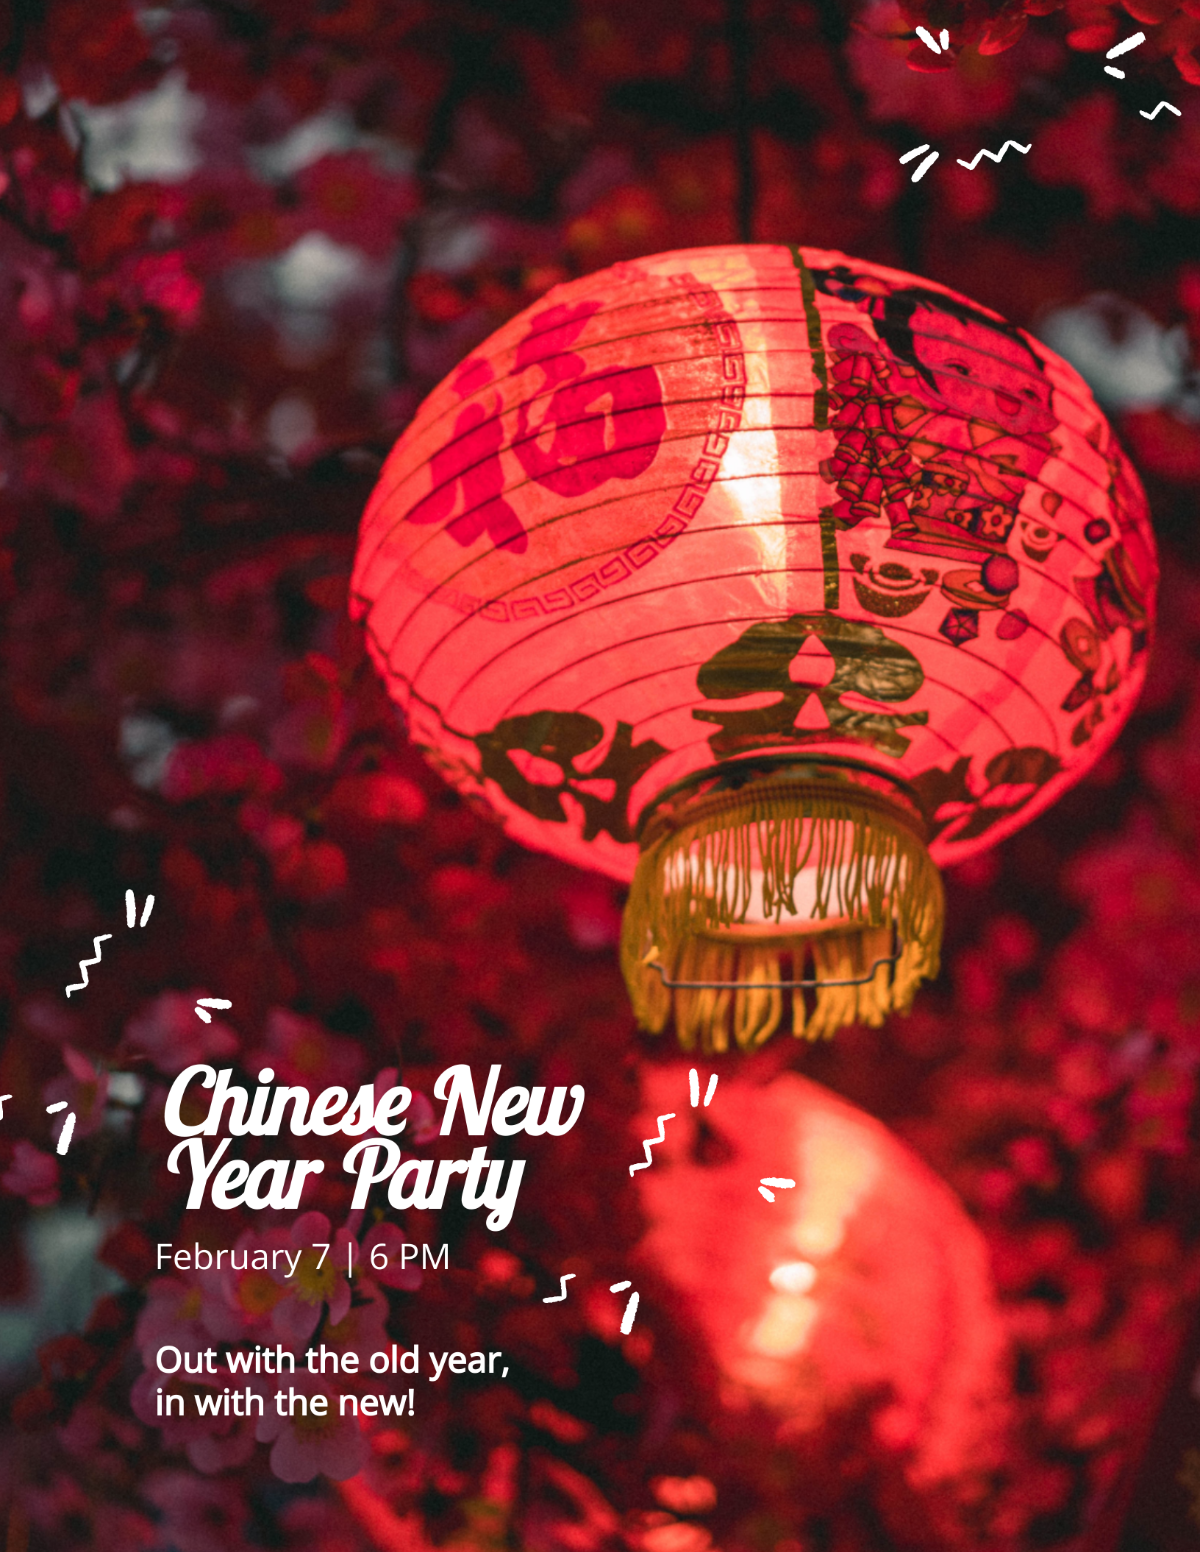 Free Chinese New Year Party Flyer Template